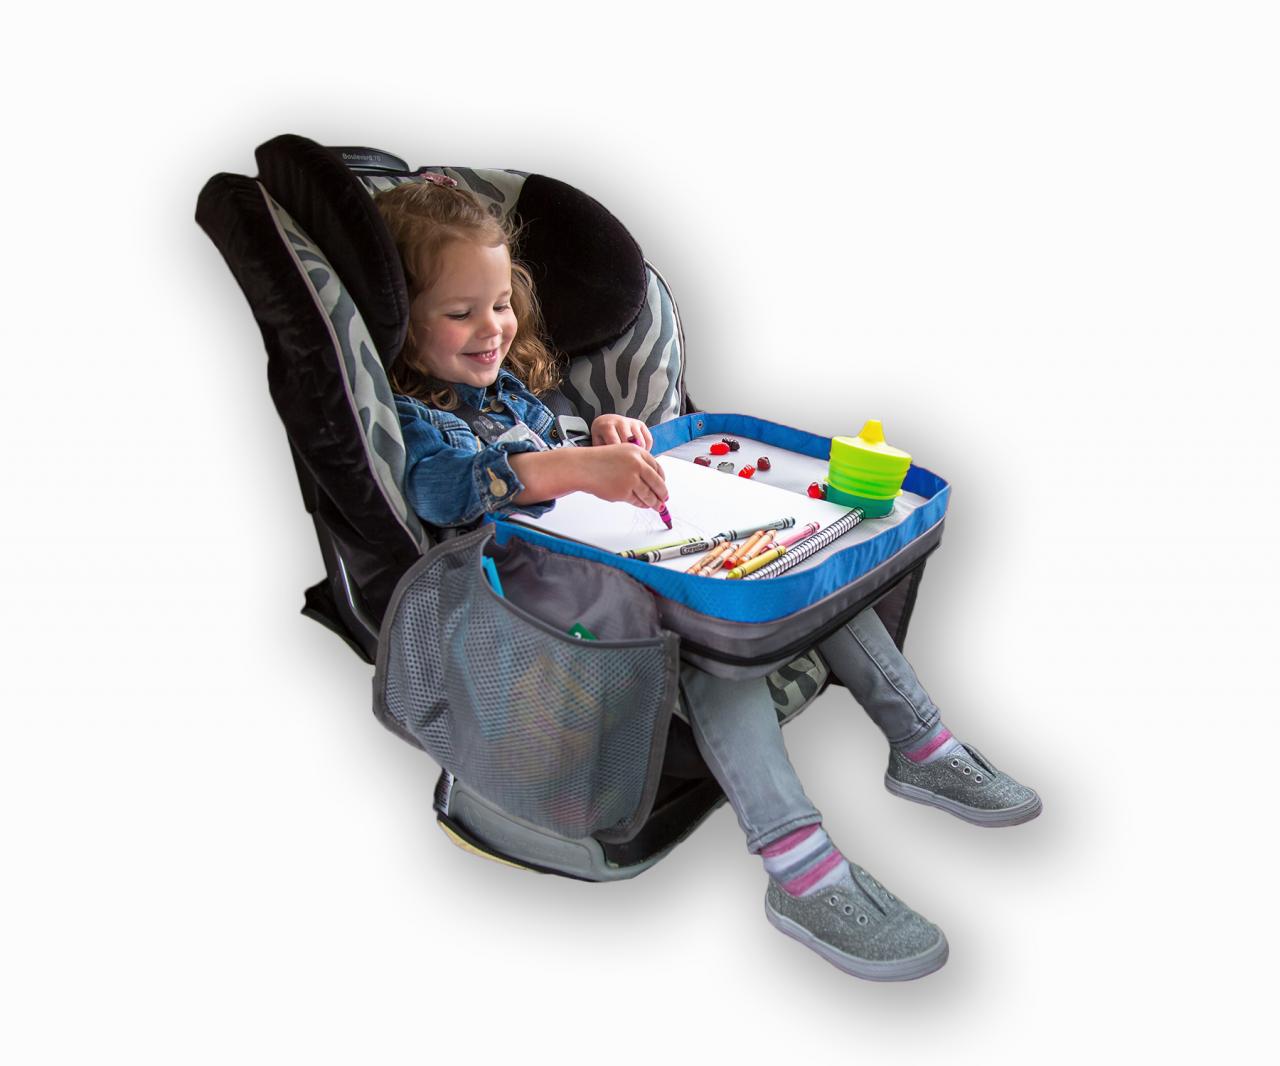 ModFamily Kids E-Z Travel Lap Desk Tray - Universal Fit for Car Seat,  Stroller & Airplane - Organized Access to Drawing, Snacks, and Activities.  Includes Bonus Printable Travel Games (Black/Grey)- Buy Online